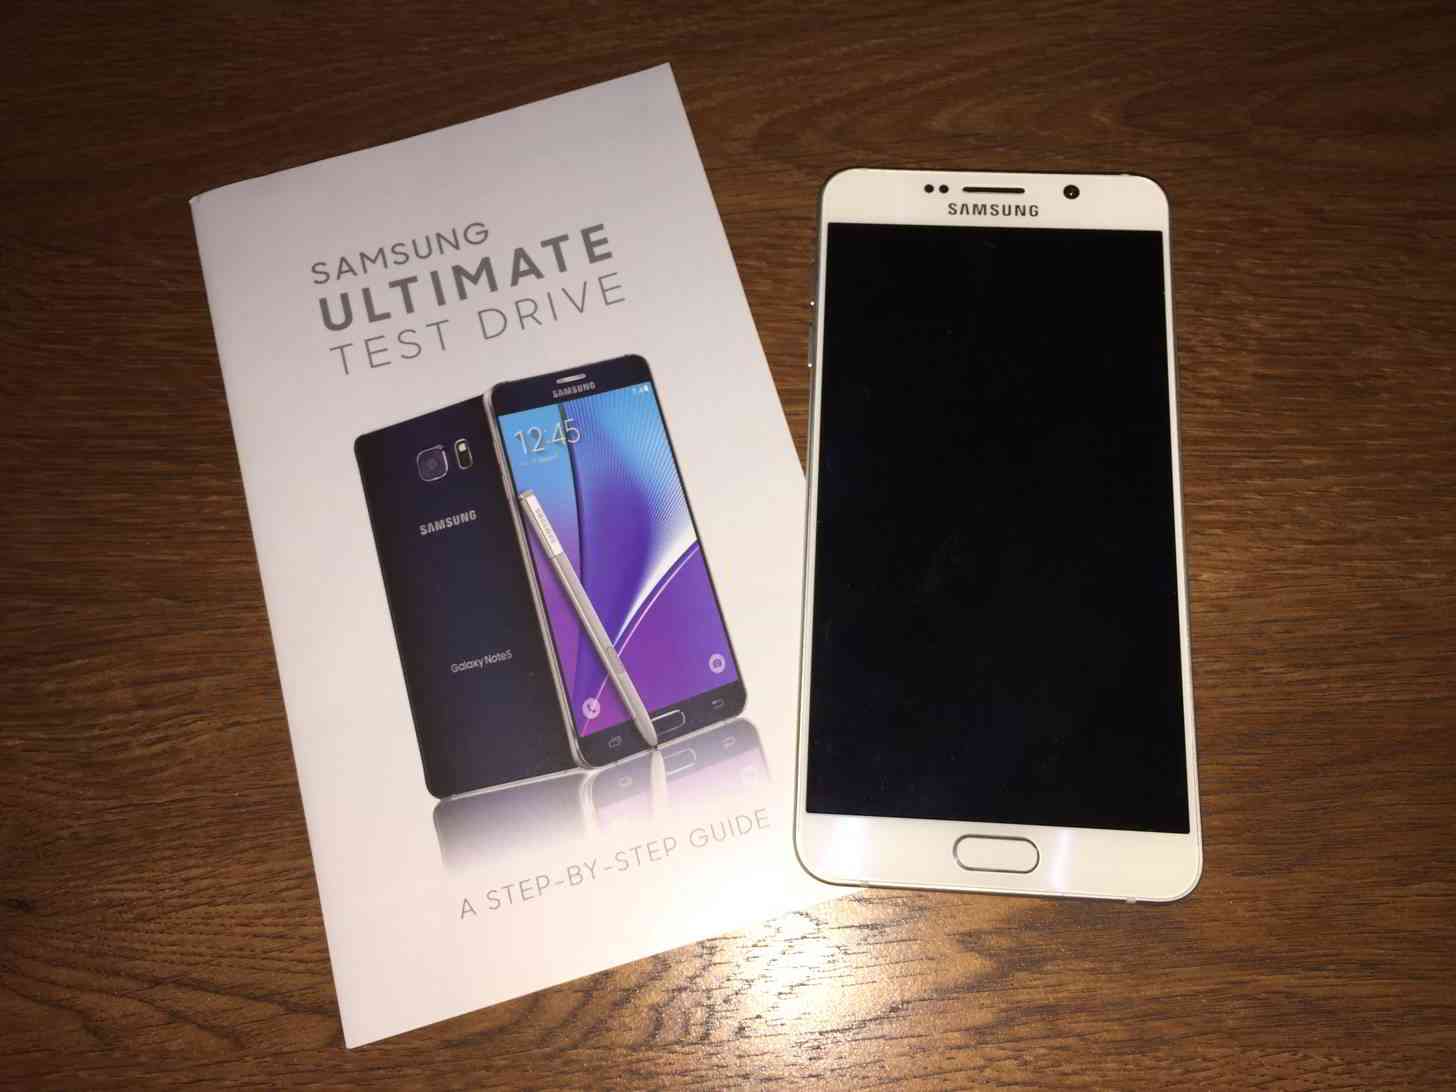 Samsung Galaxy Note 5 Ultimate Test Drive